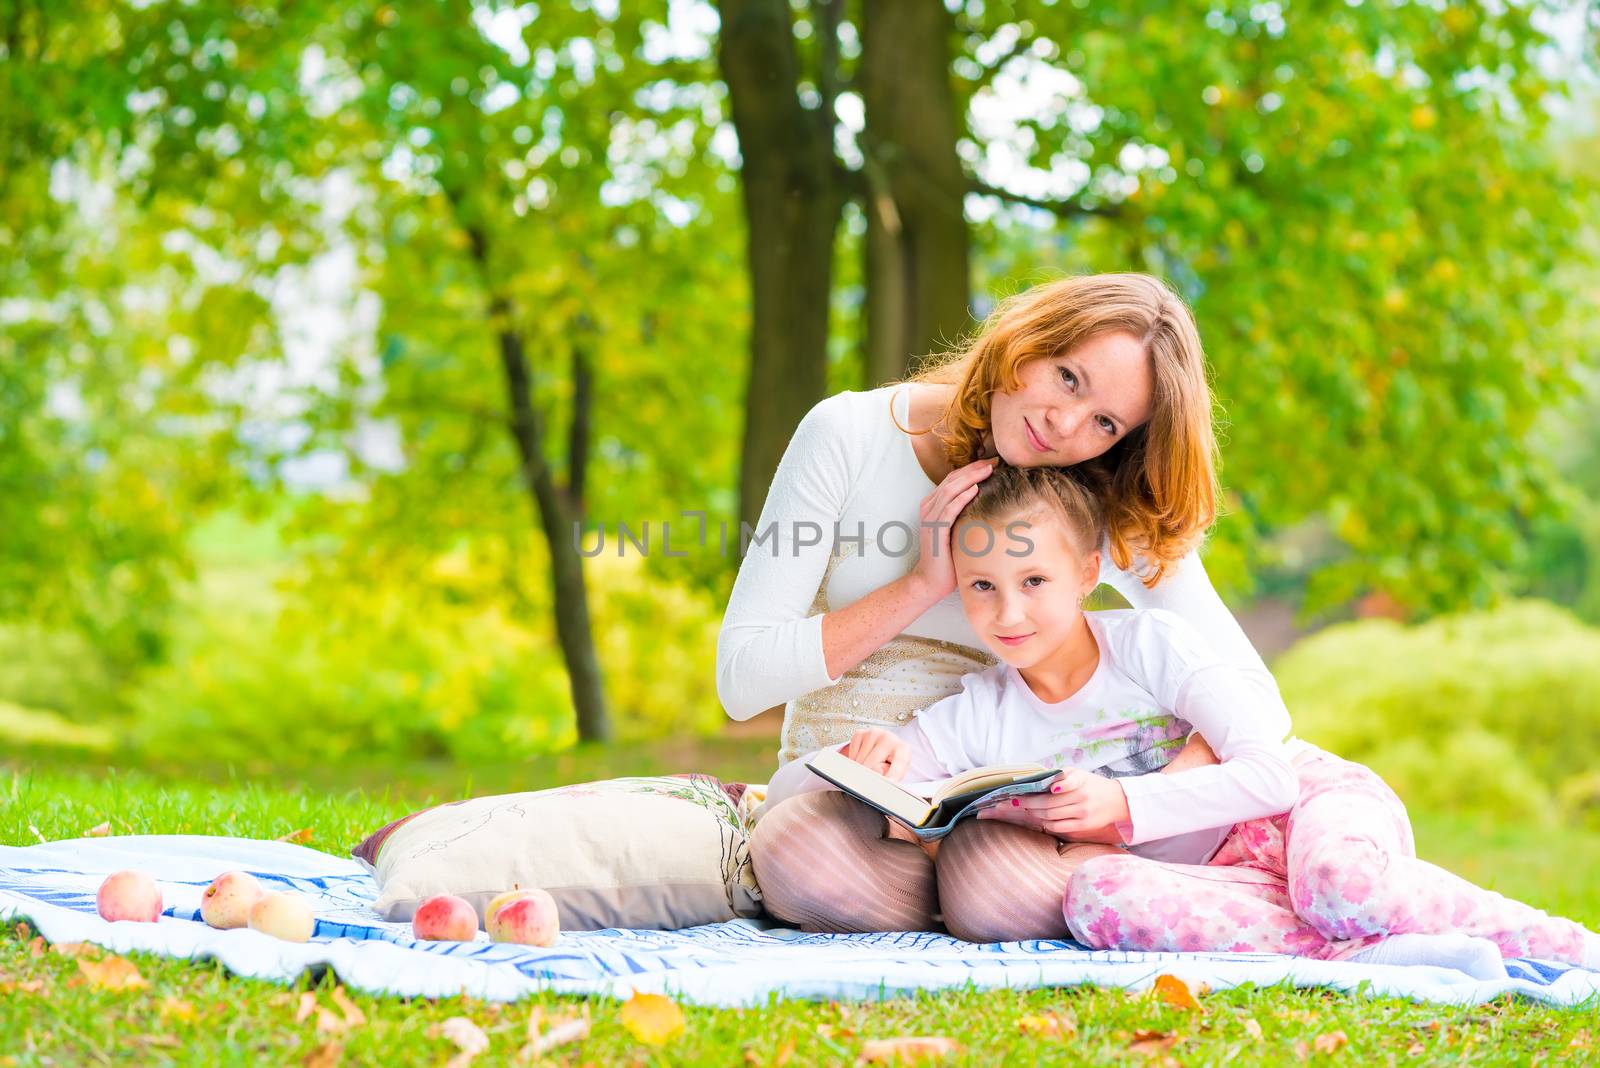 Shooting mother and daughter in the park on a picnic